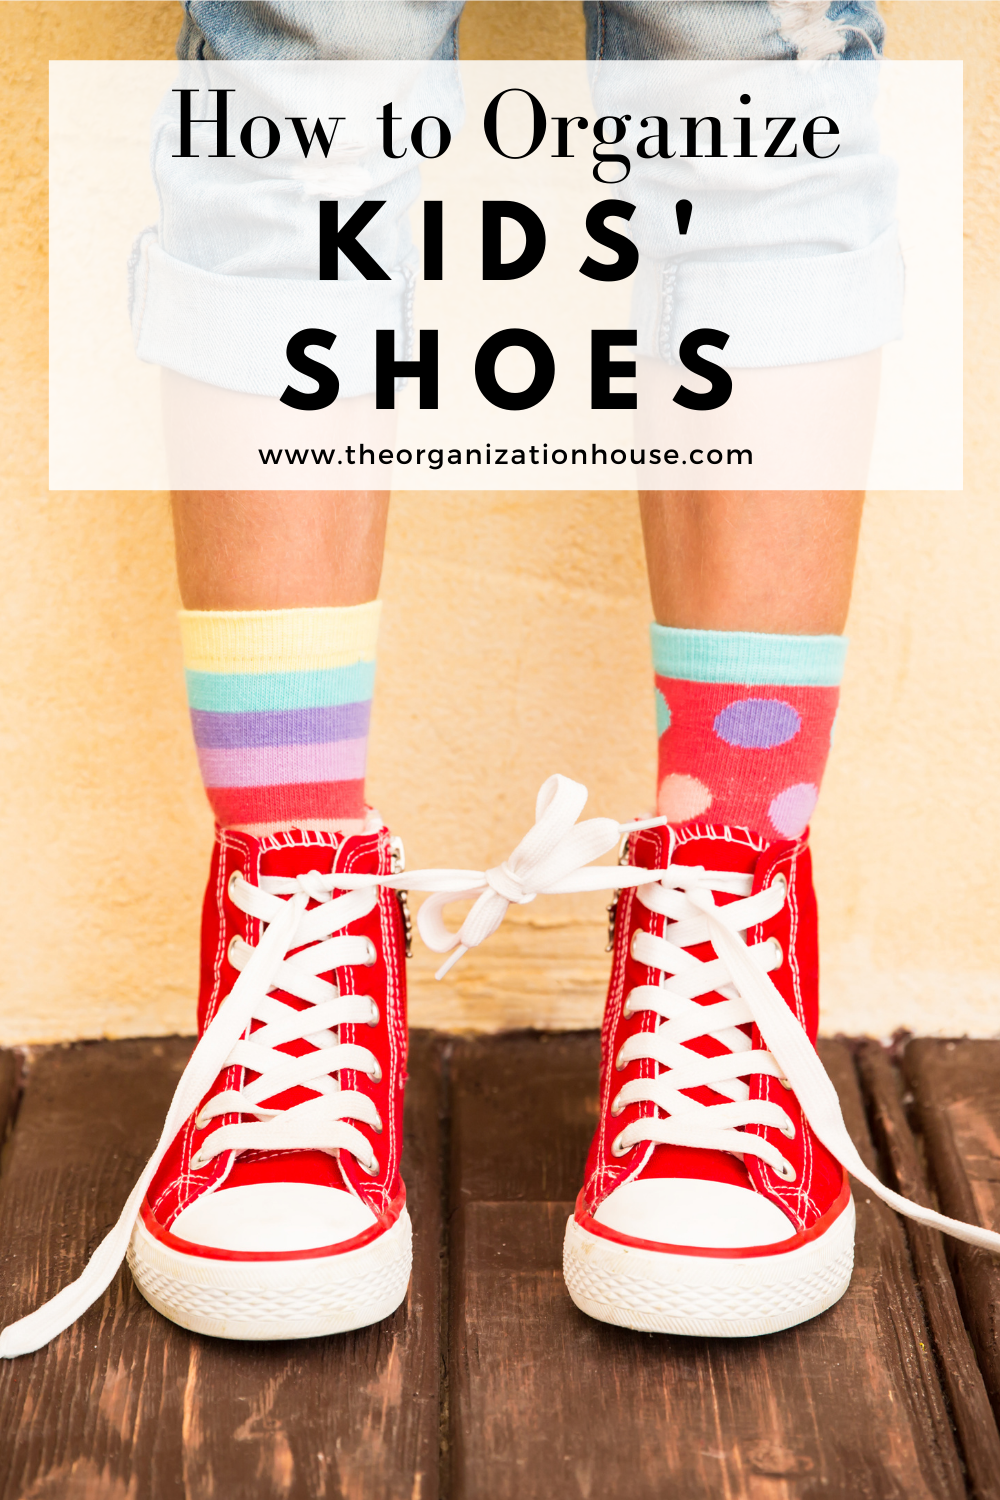 How to Organize Kids' Shoes